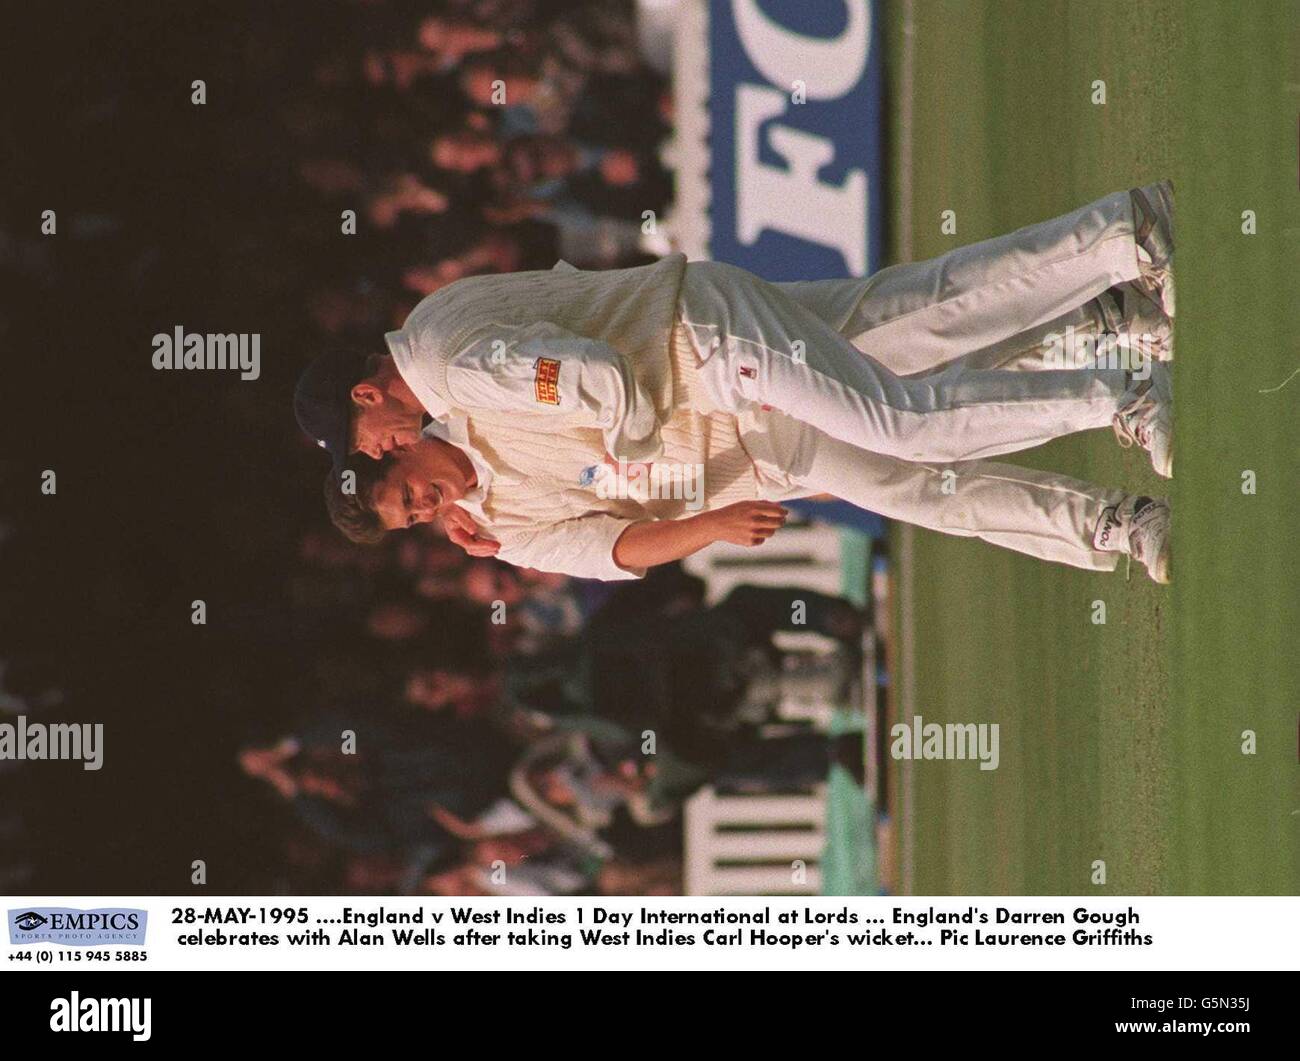 28-MAY-1995 .England v West Indies 1 Day International at Lords. England's Darren Gough celebrates with Alan Wells after taking West Indies Carl Hooper's wicket Stock Photo